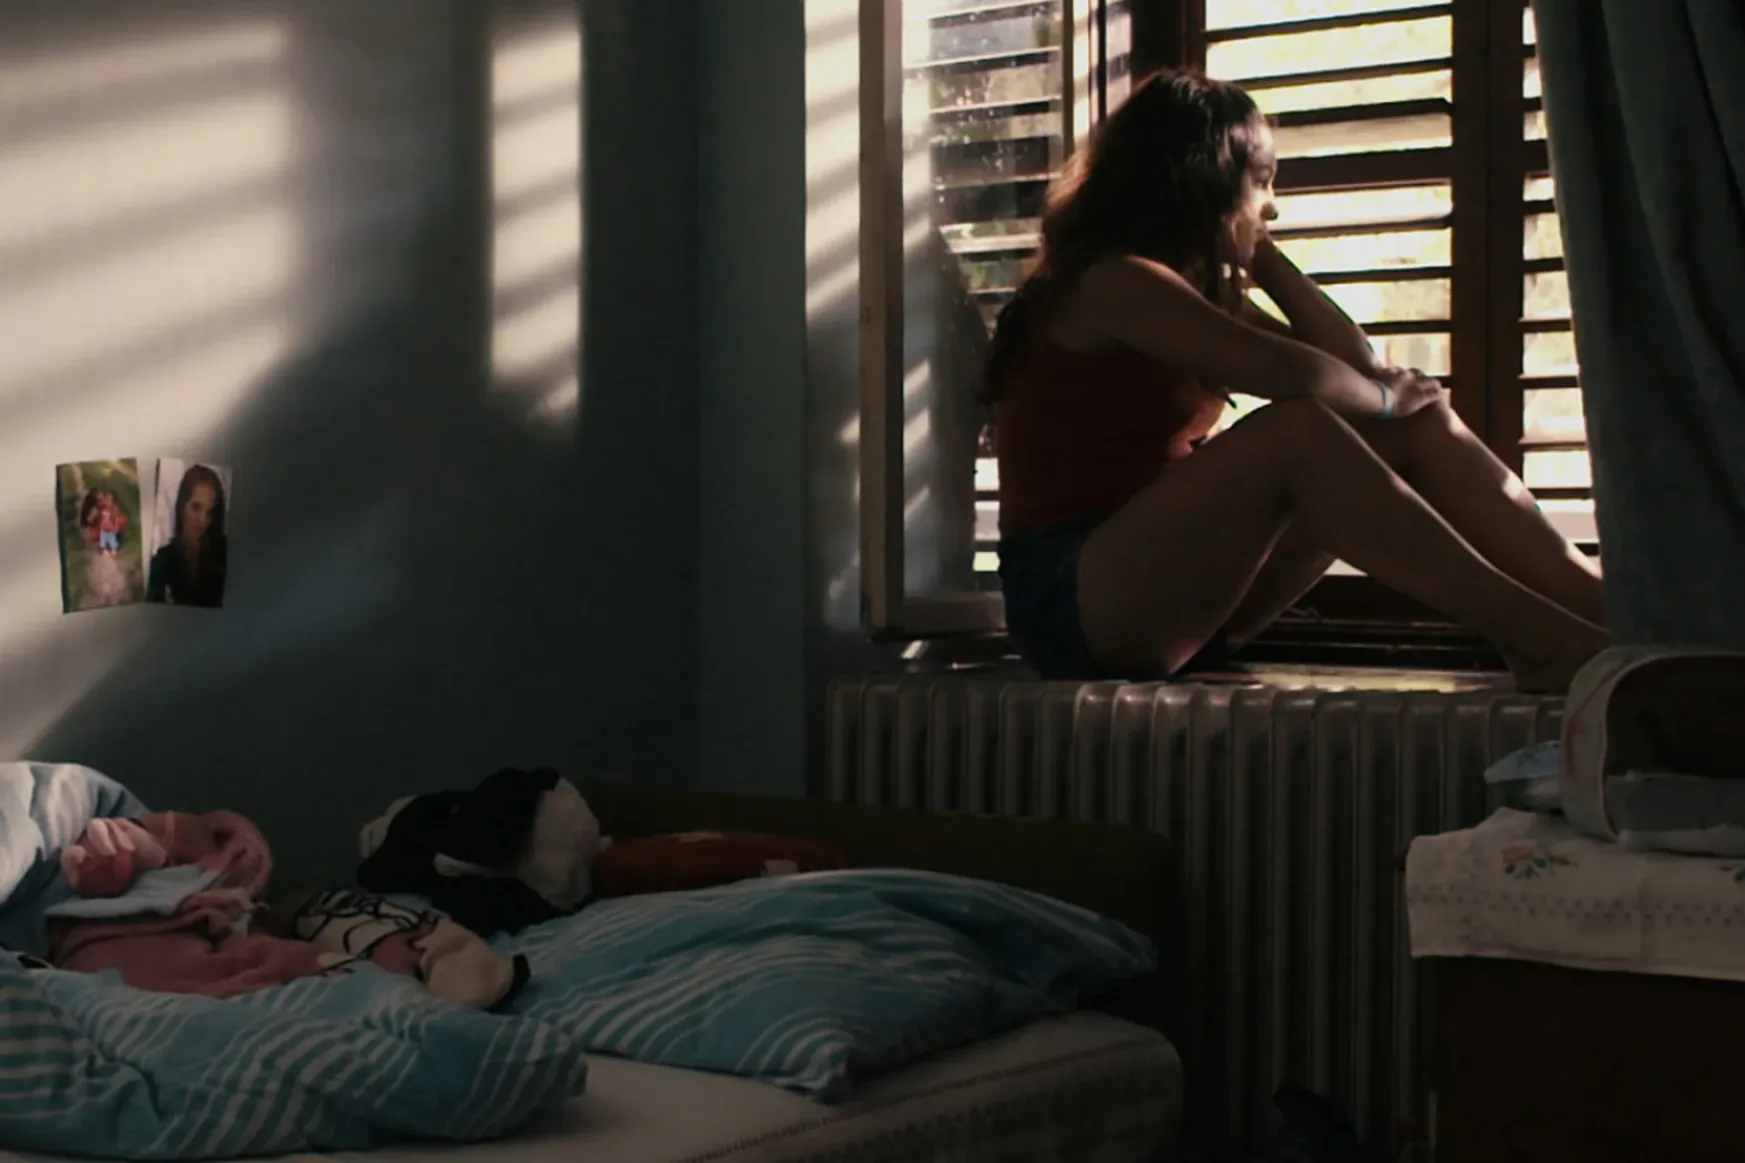 Frightfully authentic feature film shows how Hungarian girls end up in child prostitution